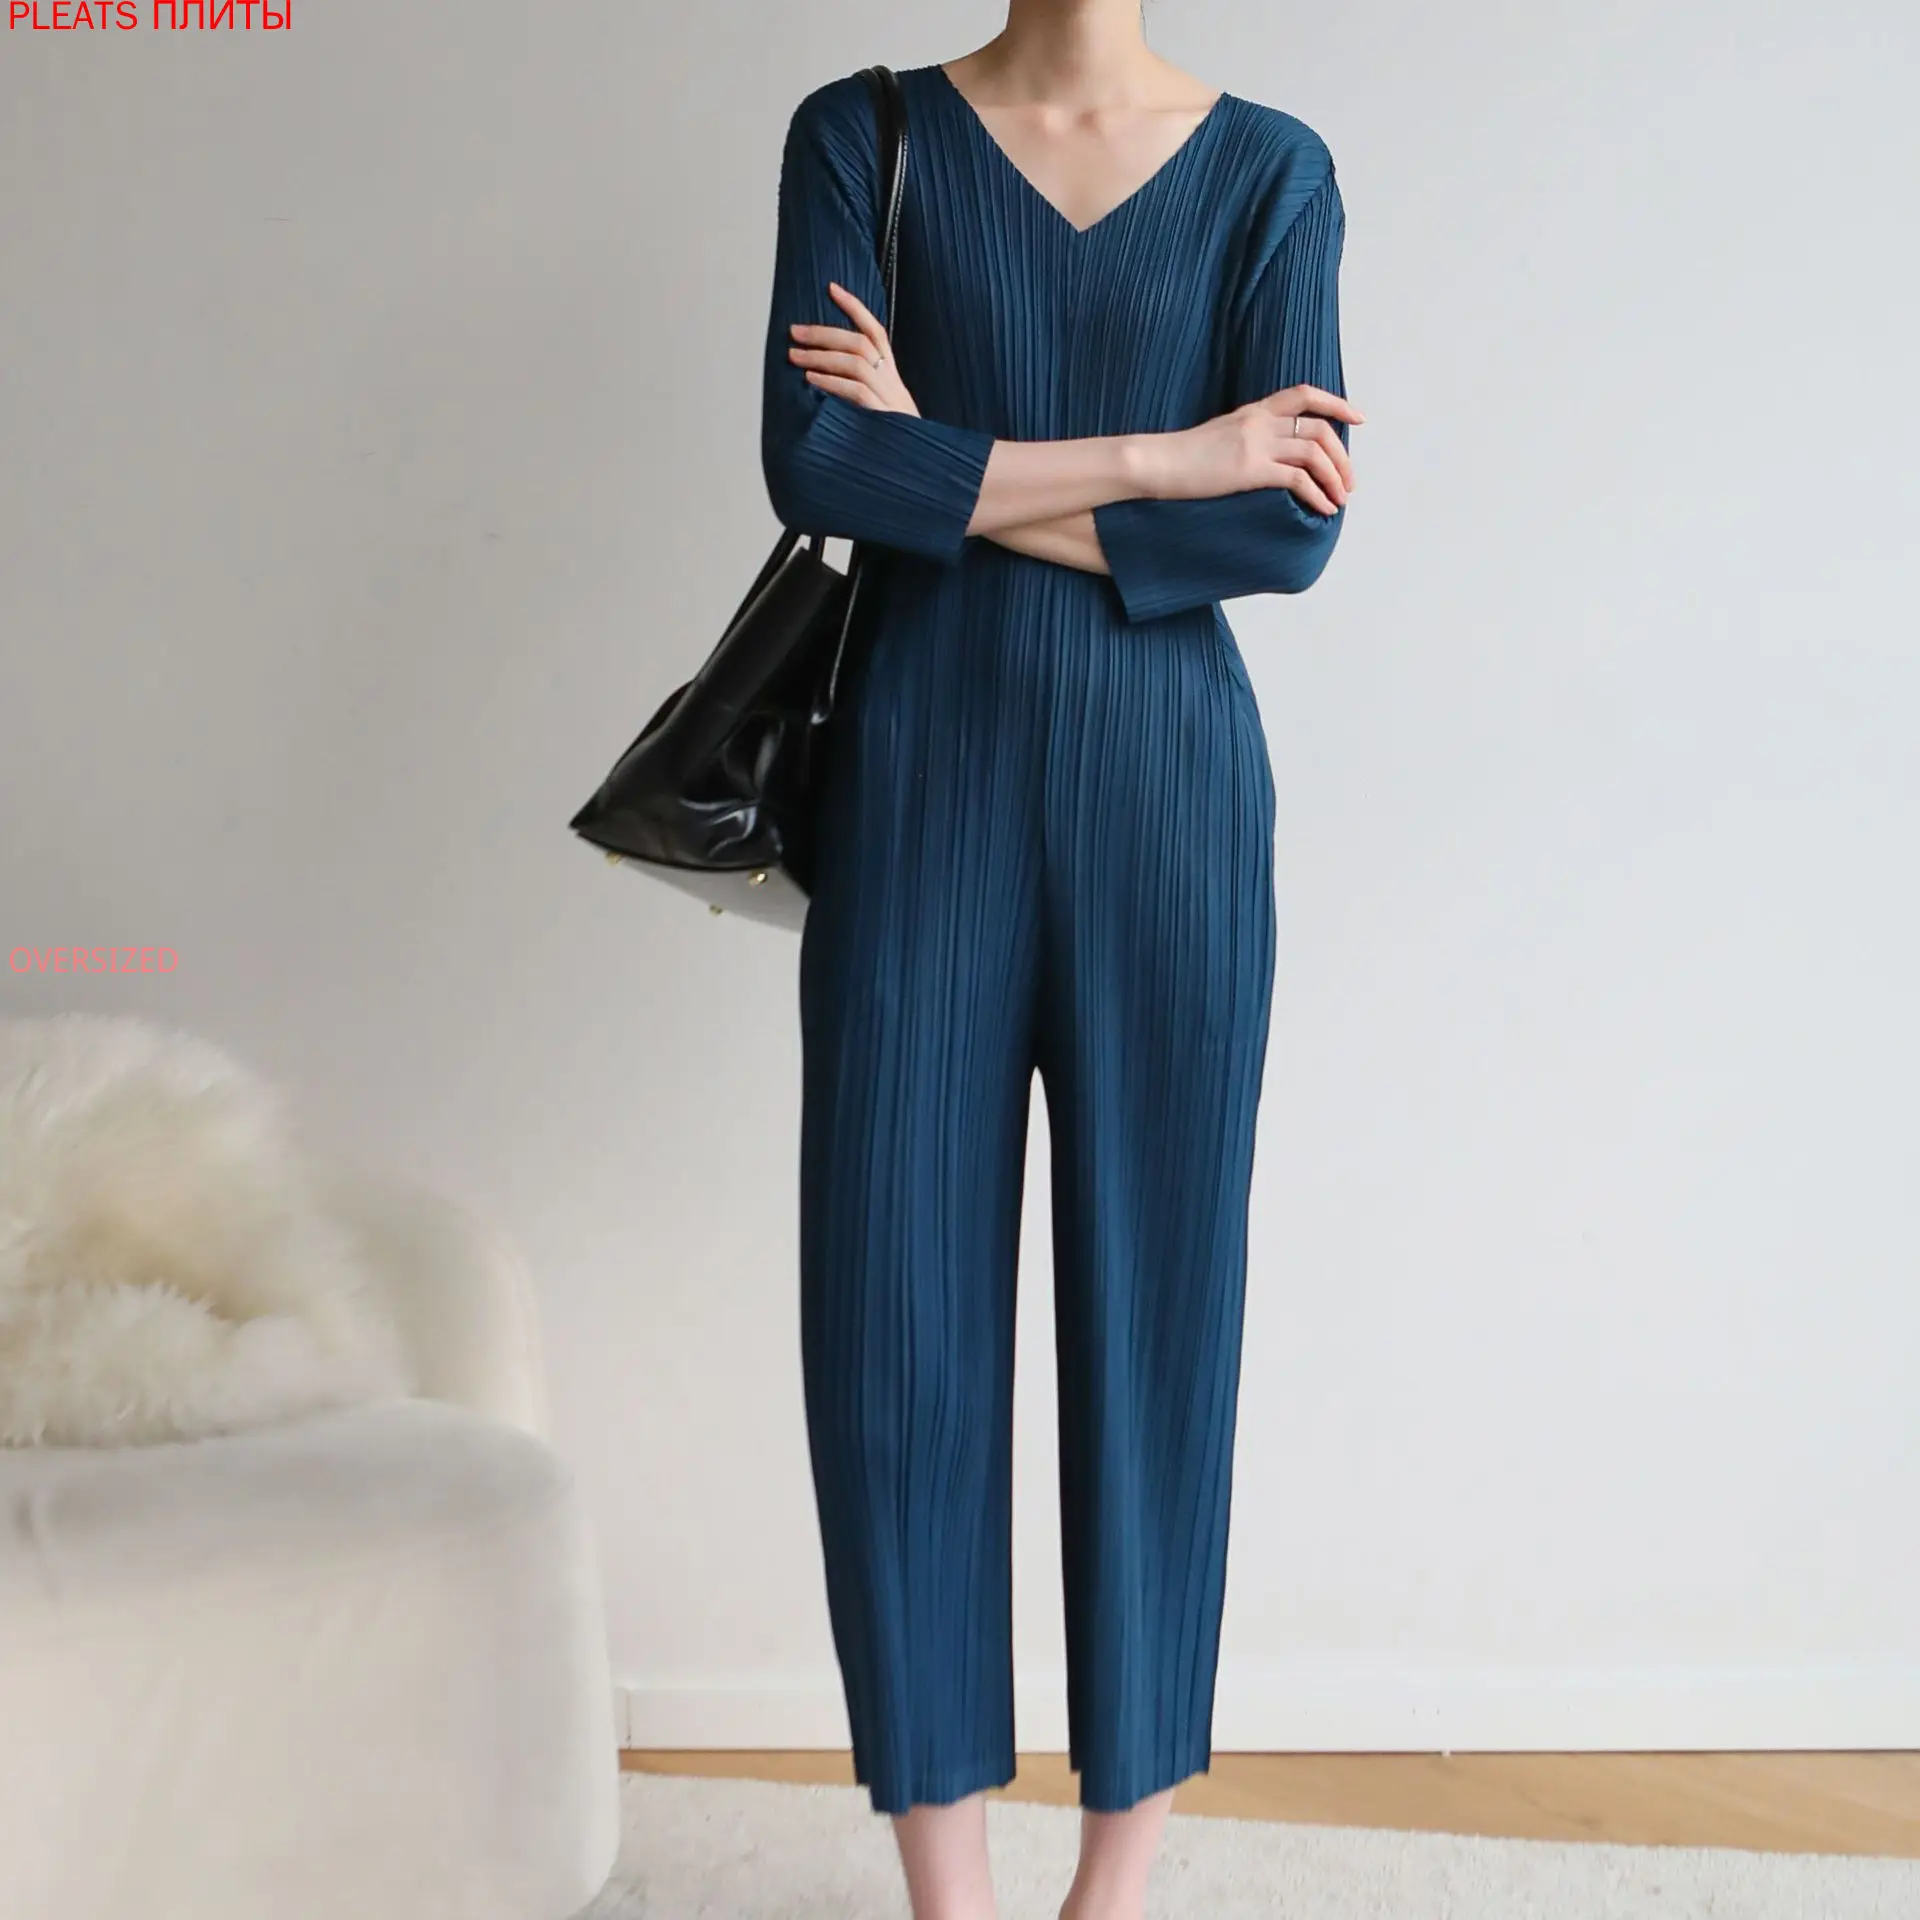 Autumn Style Ins Miyake Folds New V-neck Large Size Slimming Thin Section Seven-point Sleeve Jumpsuit Pleats Bodysuit Jumpsuit